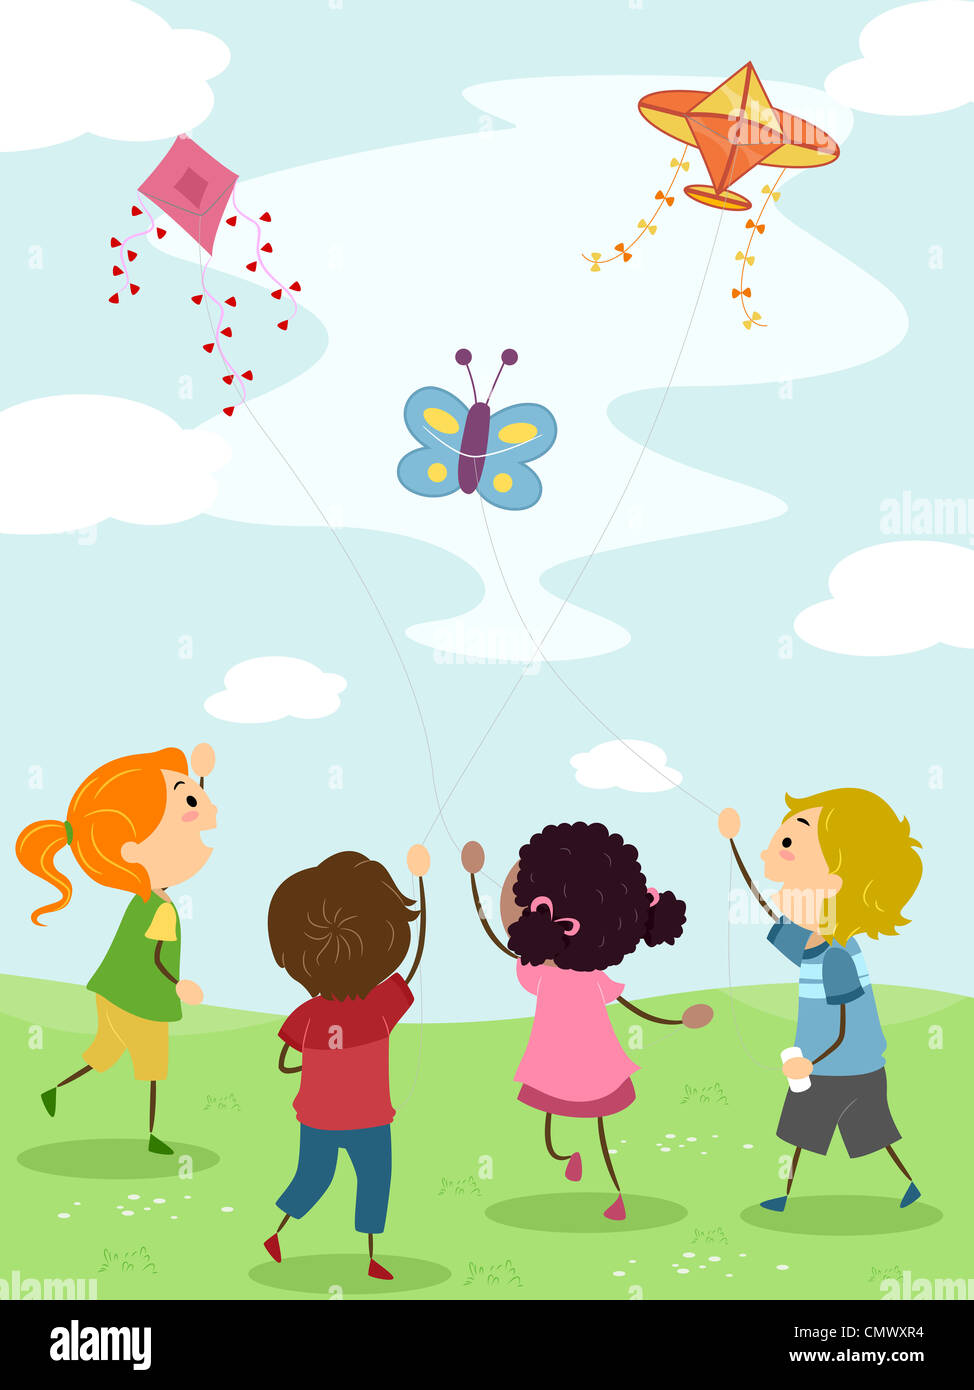 Best Kid flying kite with parents Illustration download in PNG & Vector  format